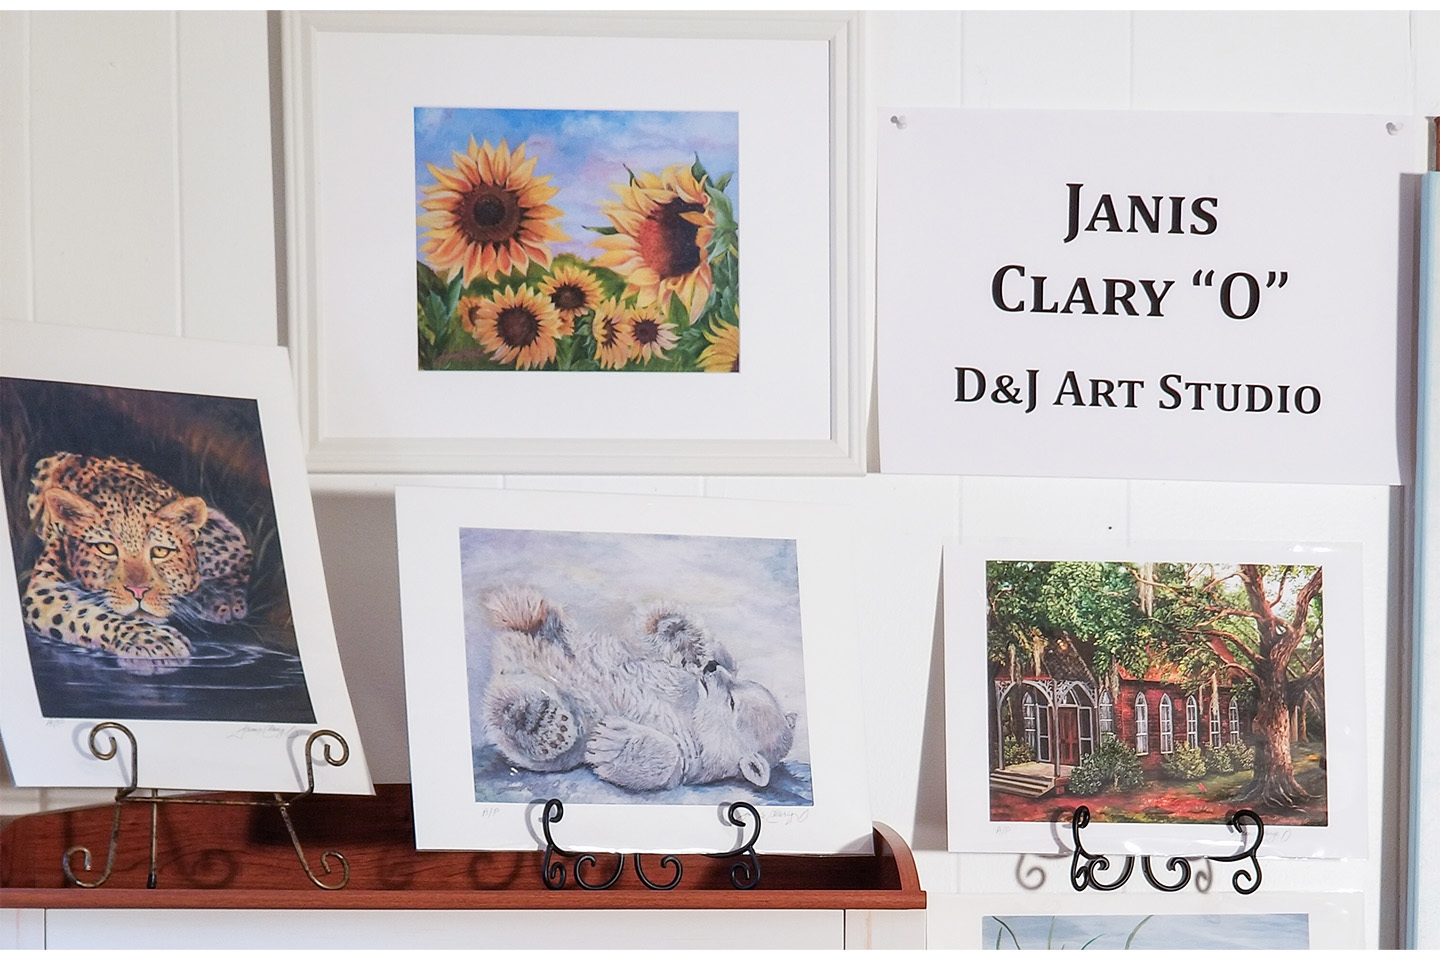 Janis Clary "O" Art & Relics Sale to benefit the steeple restoration on the historic building